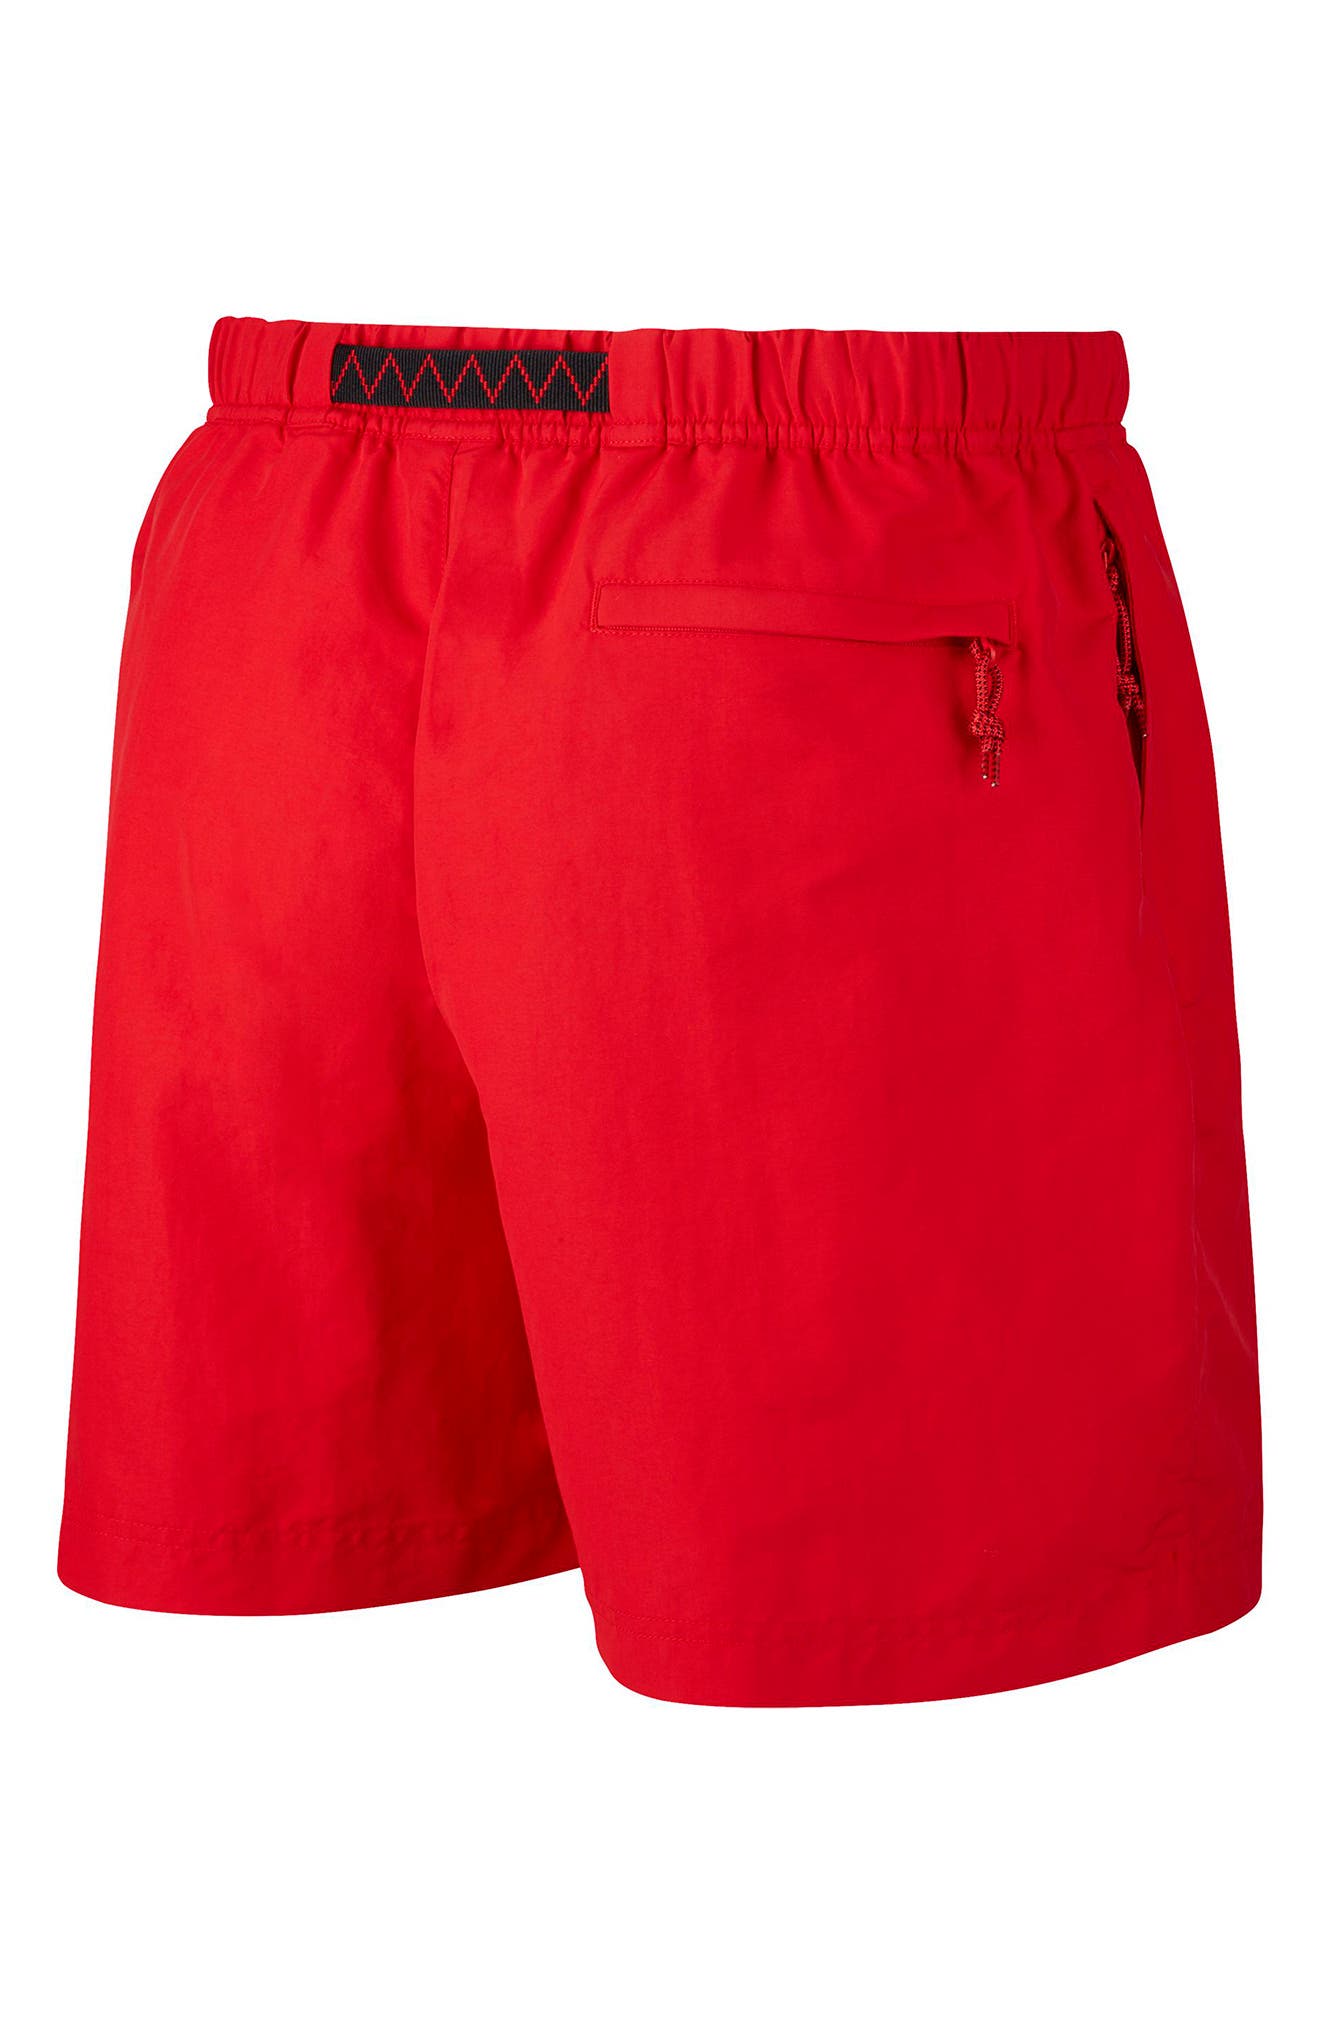 red nike shorts outfit